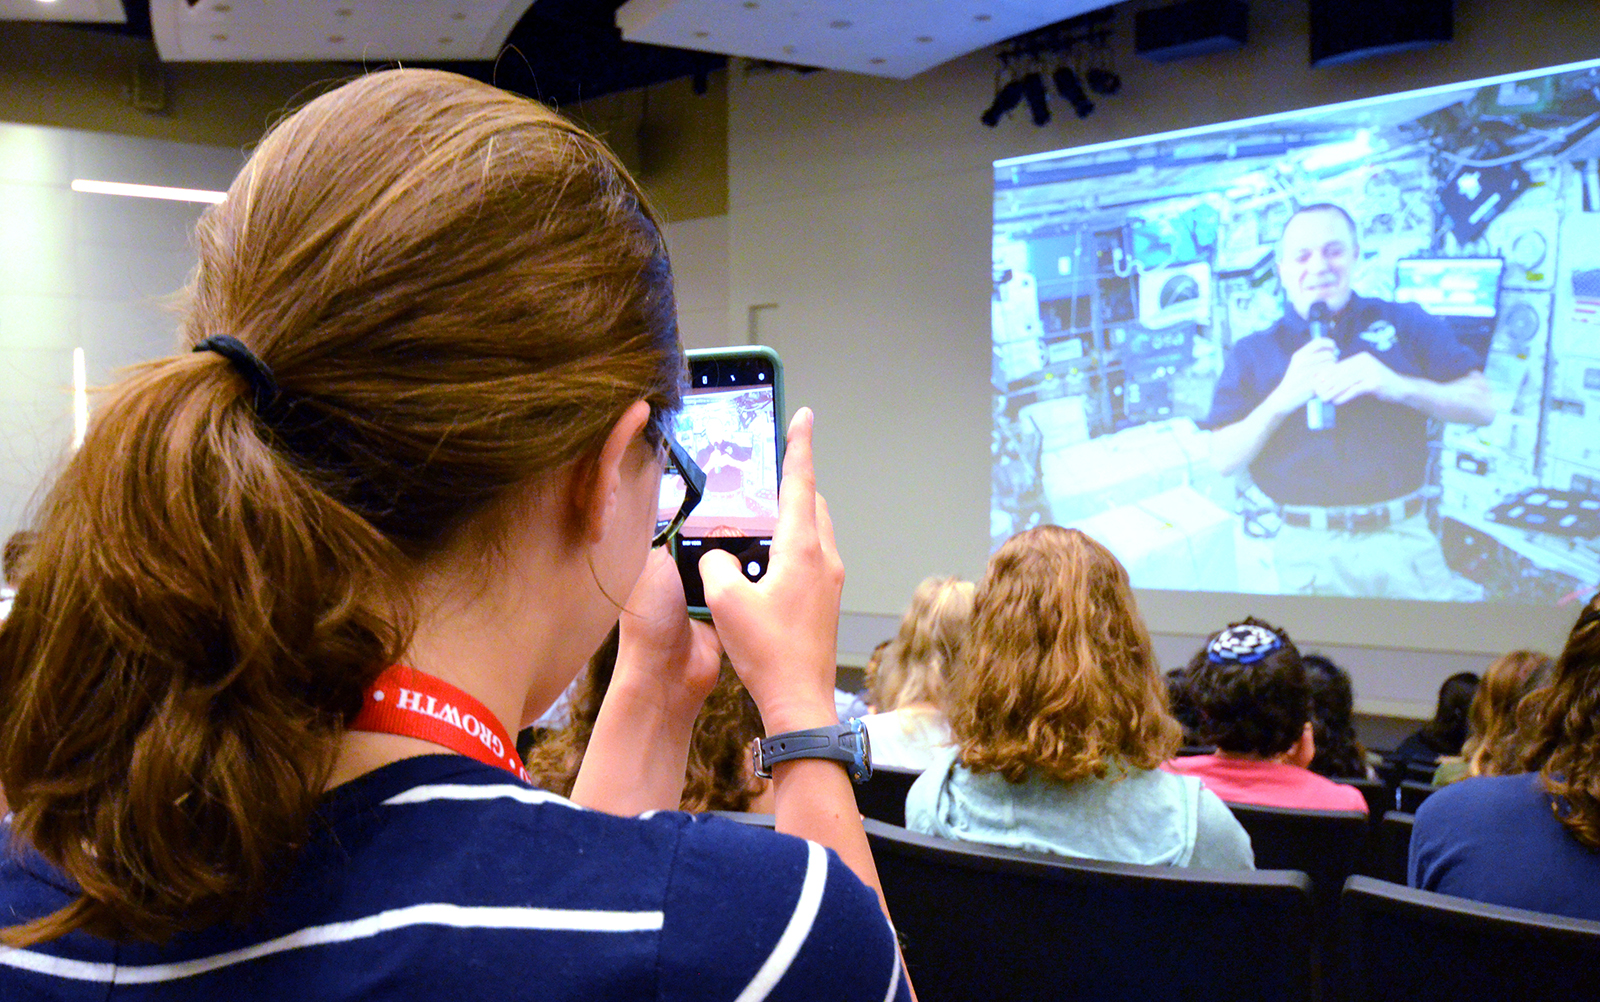 An intern takes a photo at the ISS Downlink watch party at JPL